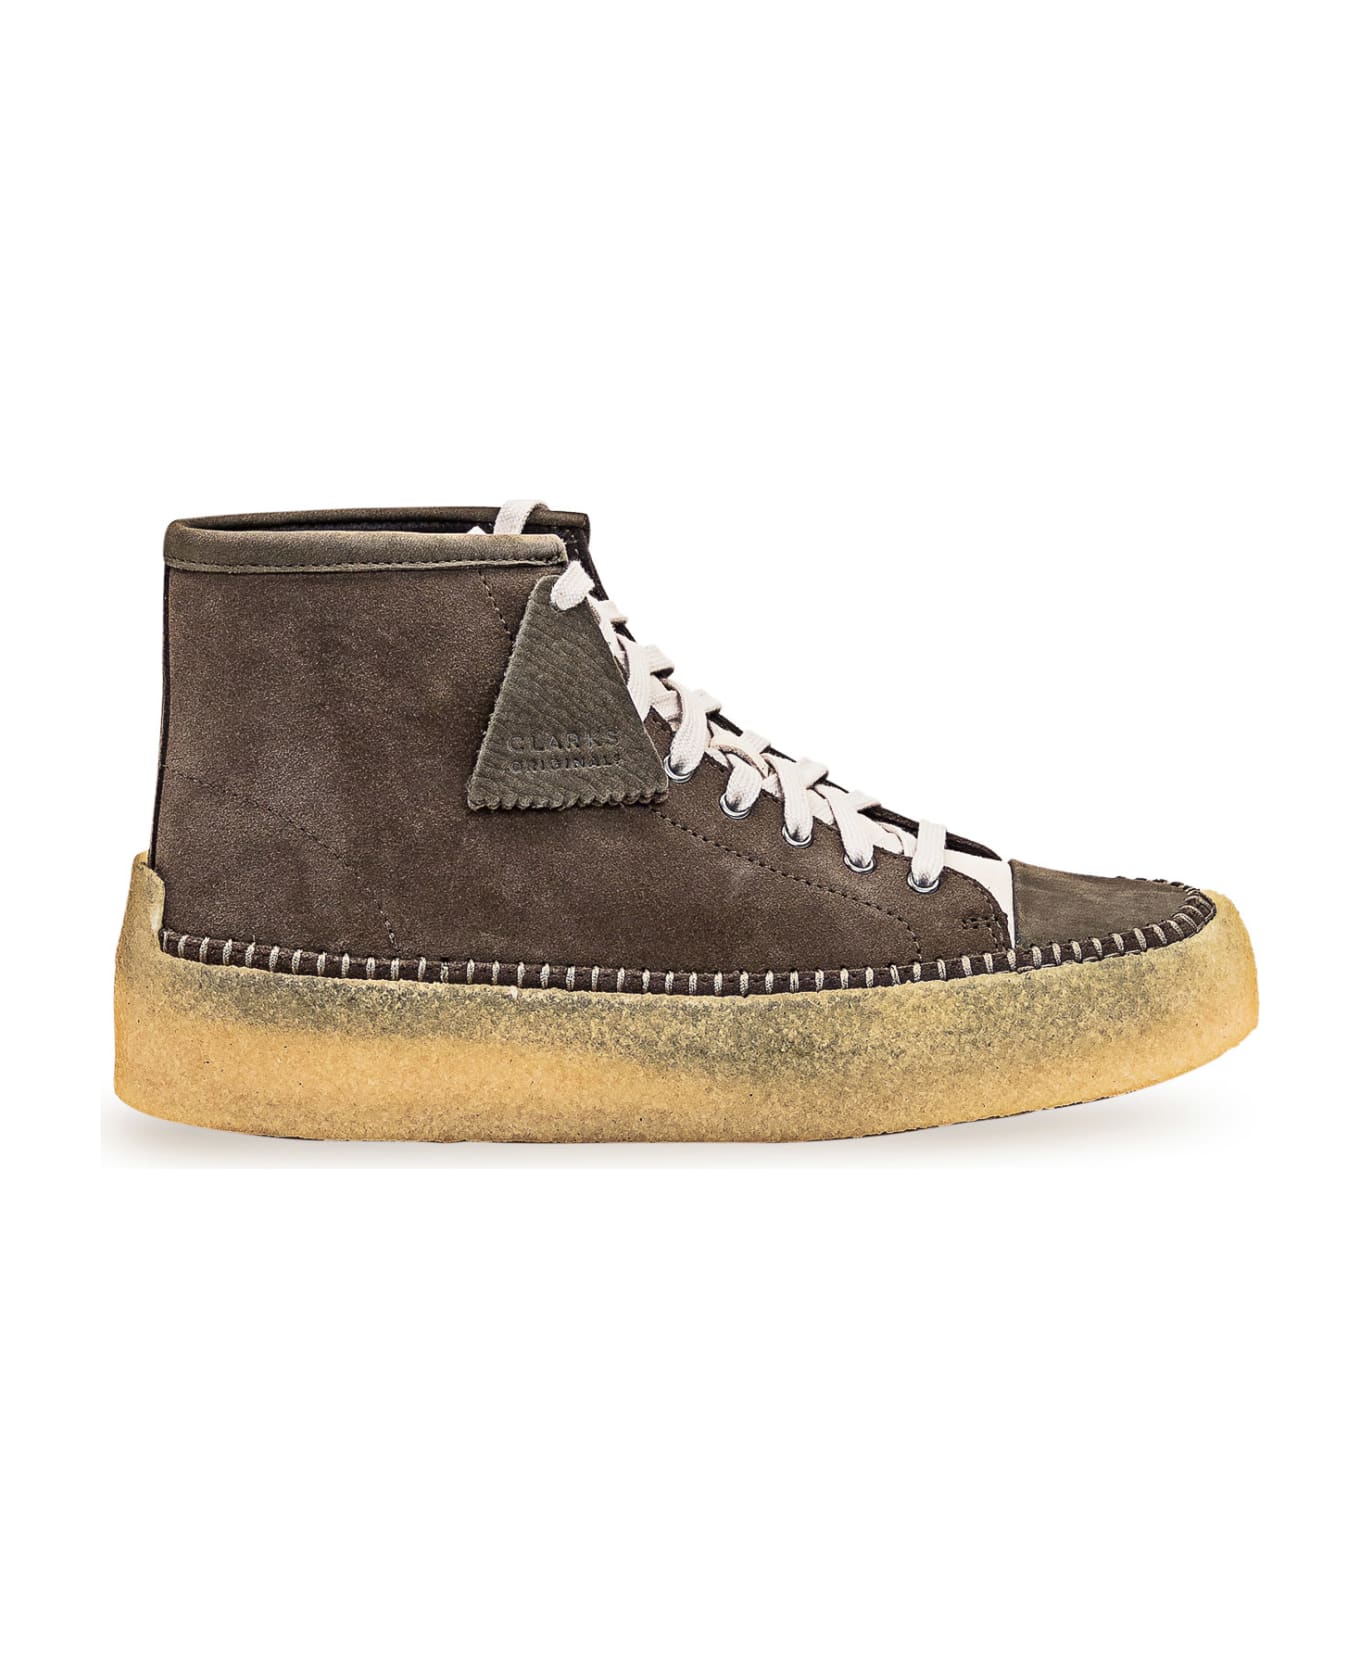 Clarks Caravad Mid Boots - ARMY その他各種シューズ